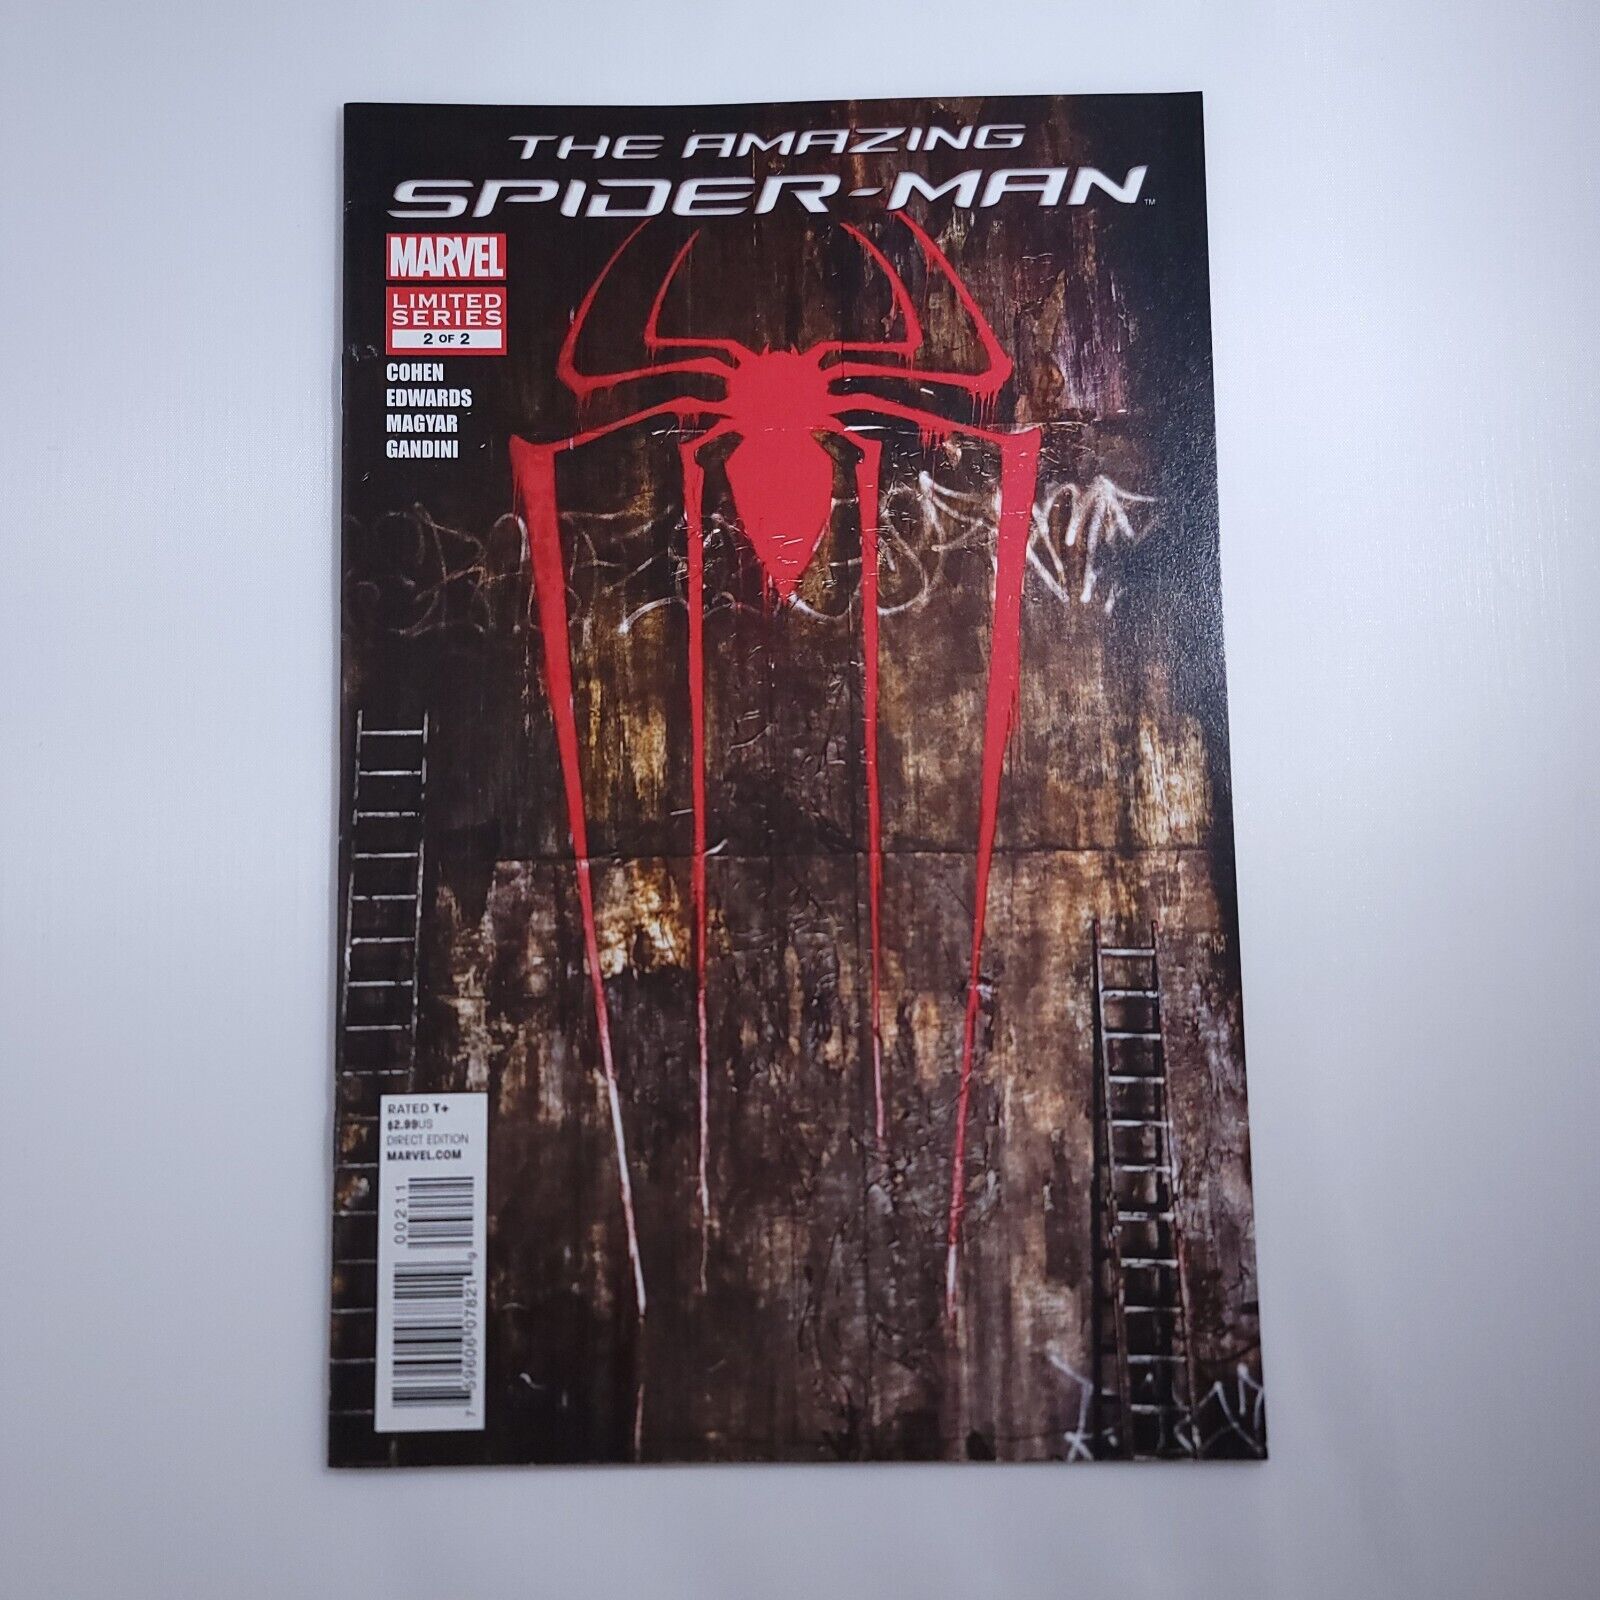 The Amazing Spider-Man The Official Movie Adaption #2 Comic Book